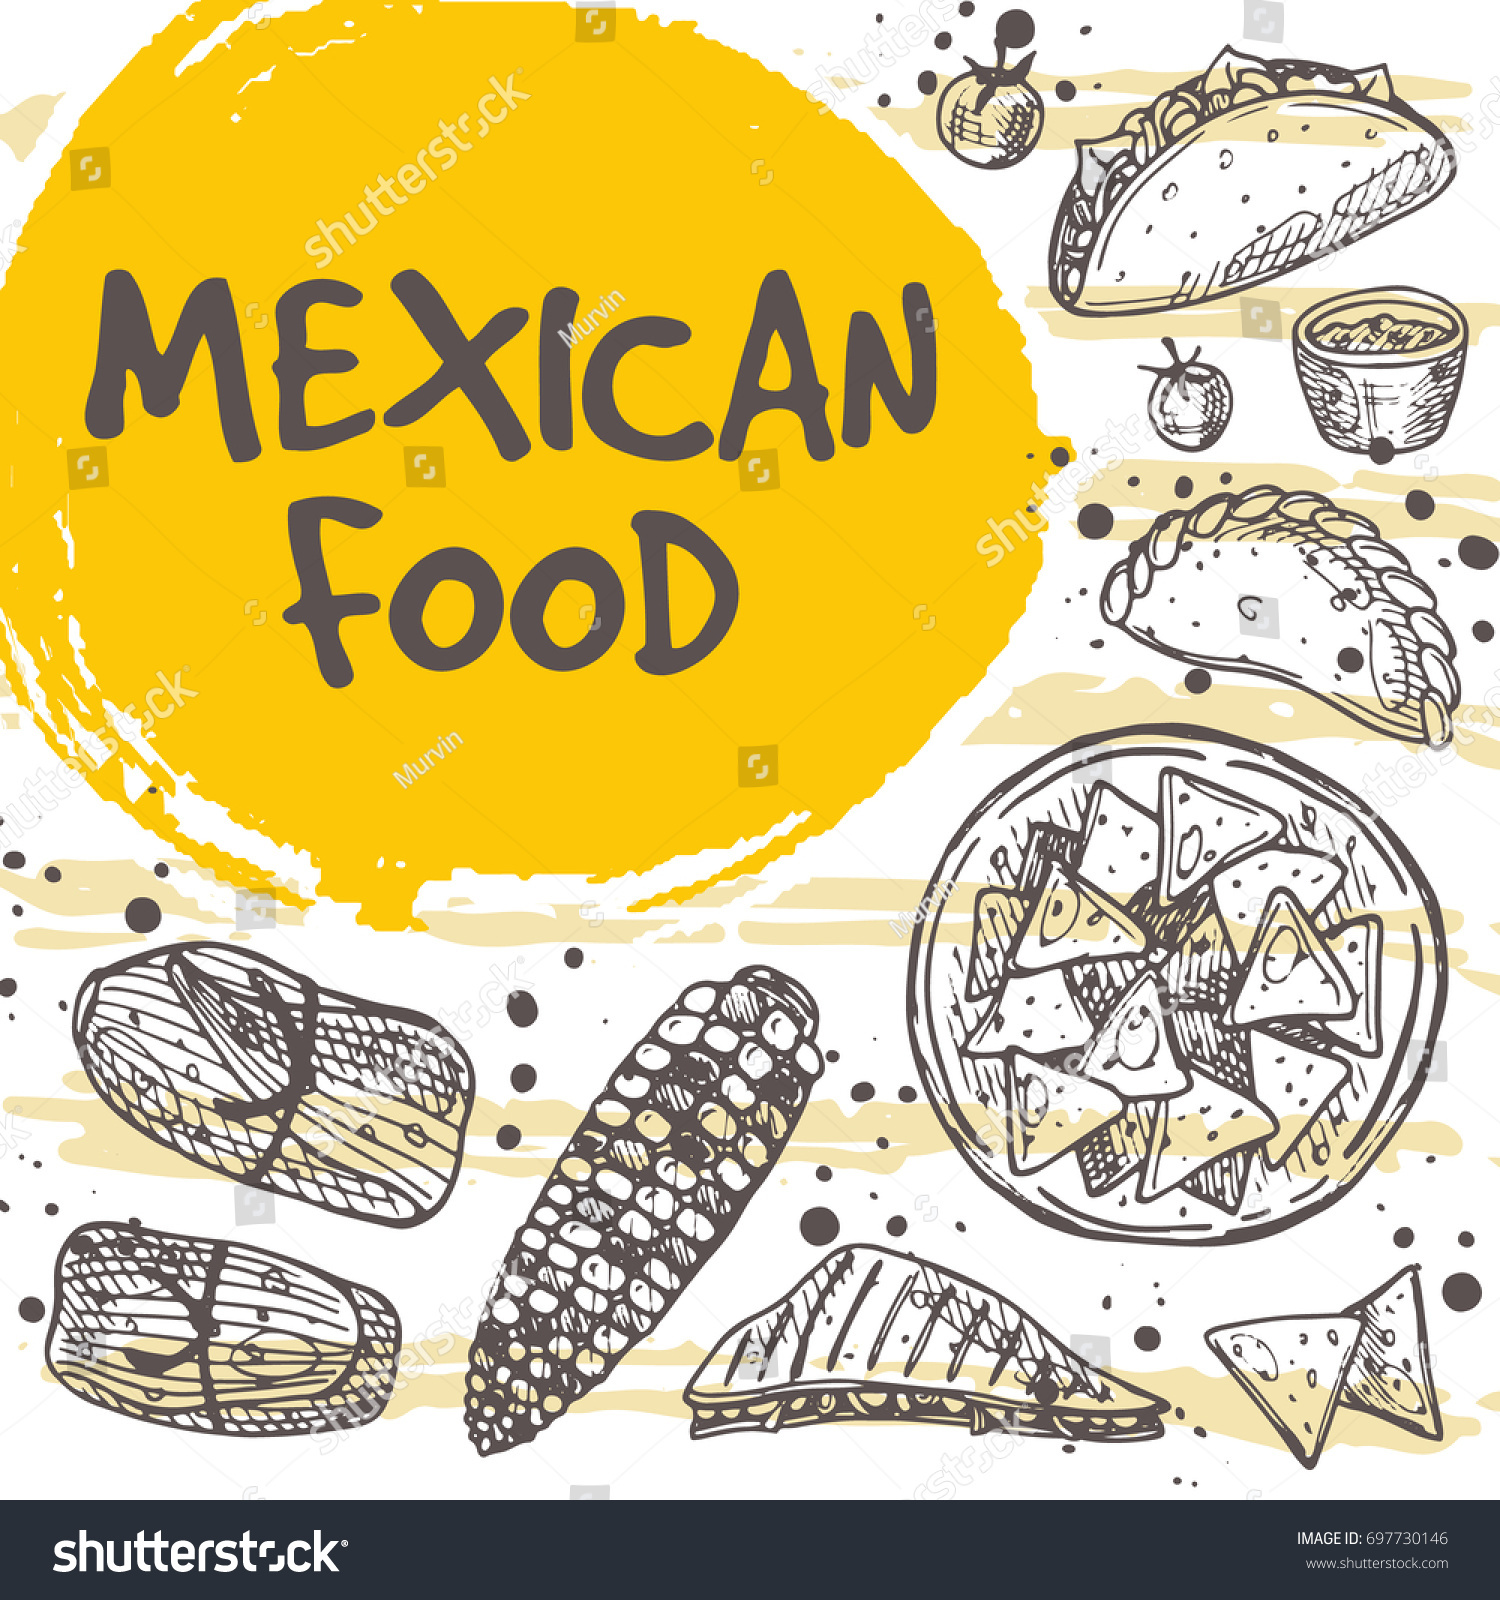 SVG of Mexican food concept design. Retro card. Hand drawn vector illustration. Tamales, corn, nachos, tacos, quesadilla. Can be used for menu, cafe, restaurant, bar, poster, banner, sticker, placard. svg